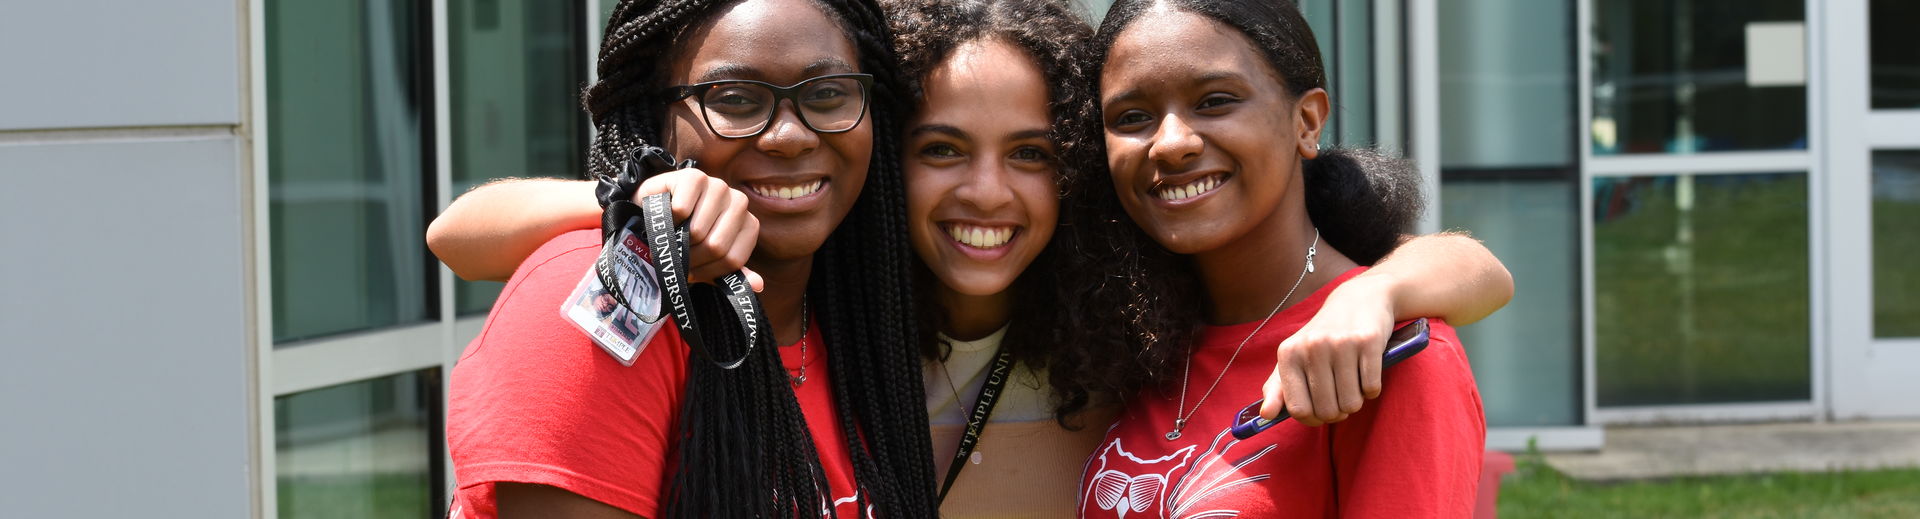 Three female pre-college students stand together with their arms around each other, posing for a photo.